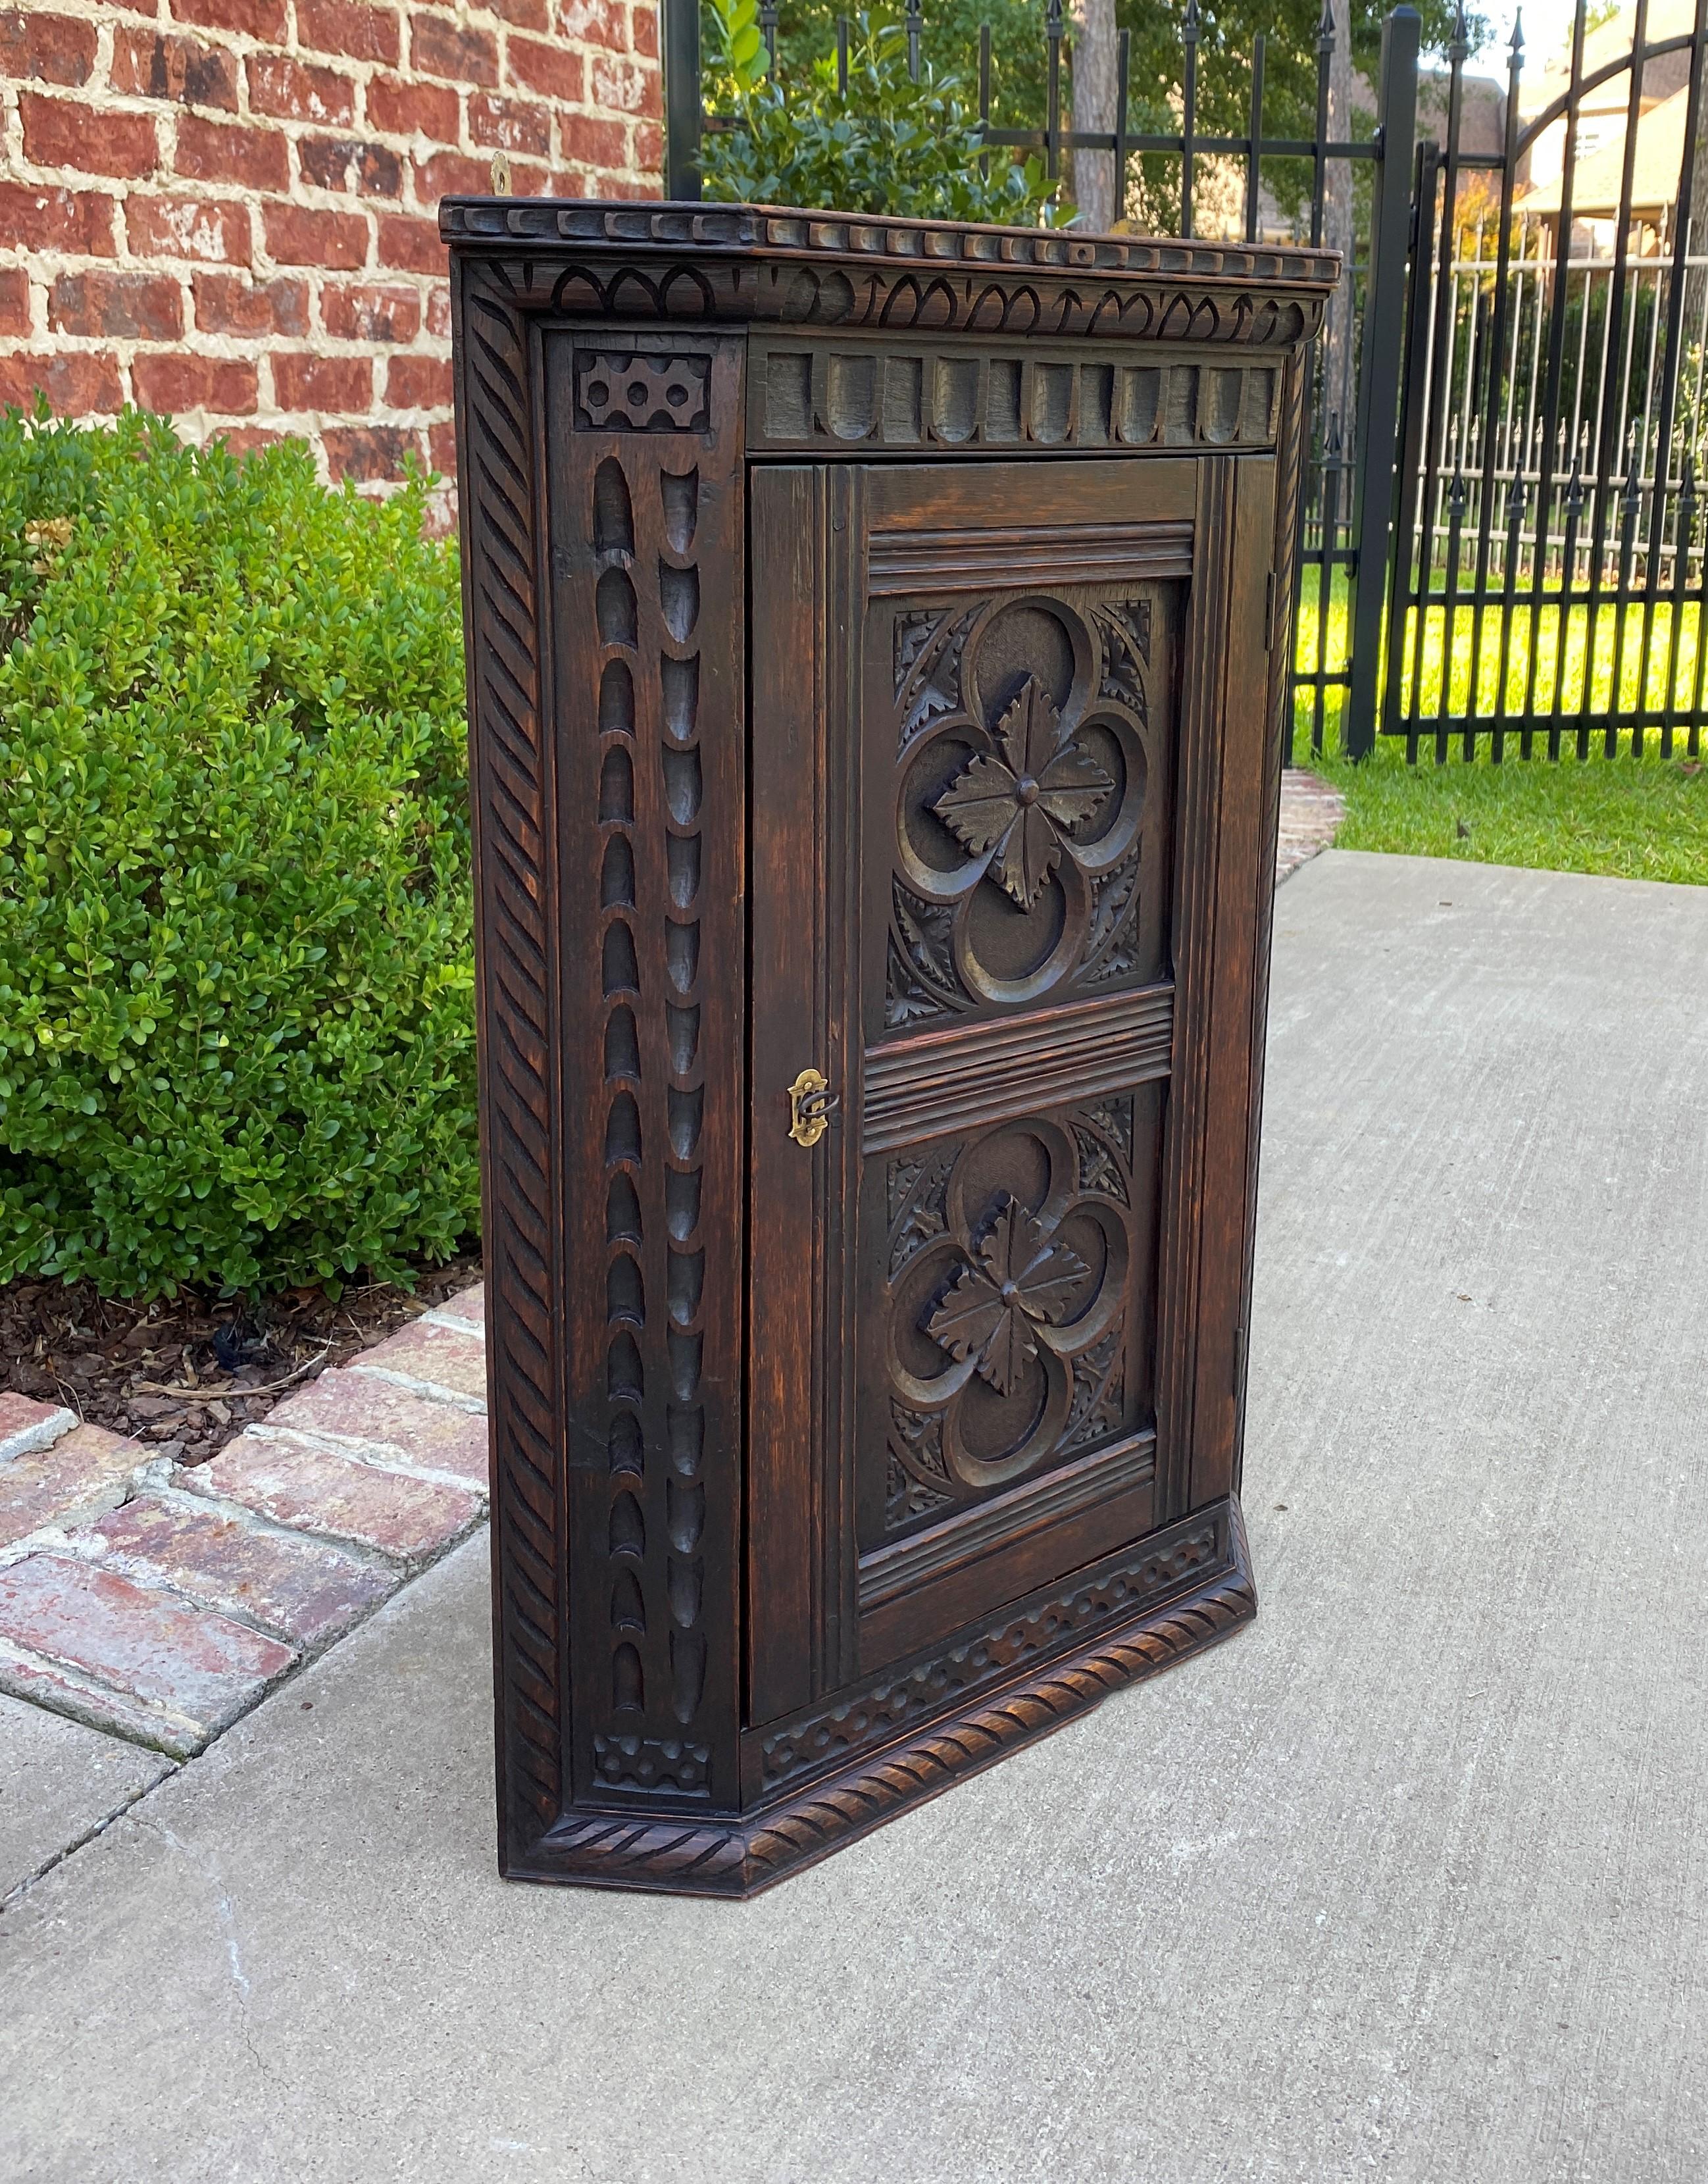 Beautiful highly carved antique english oak hanging wall or freestanding corner cabinet, medicine or spice cabinet with interior shelves~~Victorian era~~c. 1890s

Full of Classic English charm~~beautifully carved oak wall or freestanding